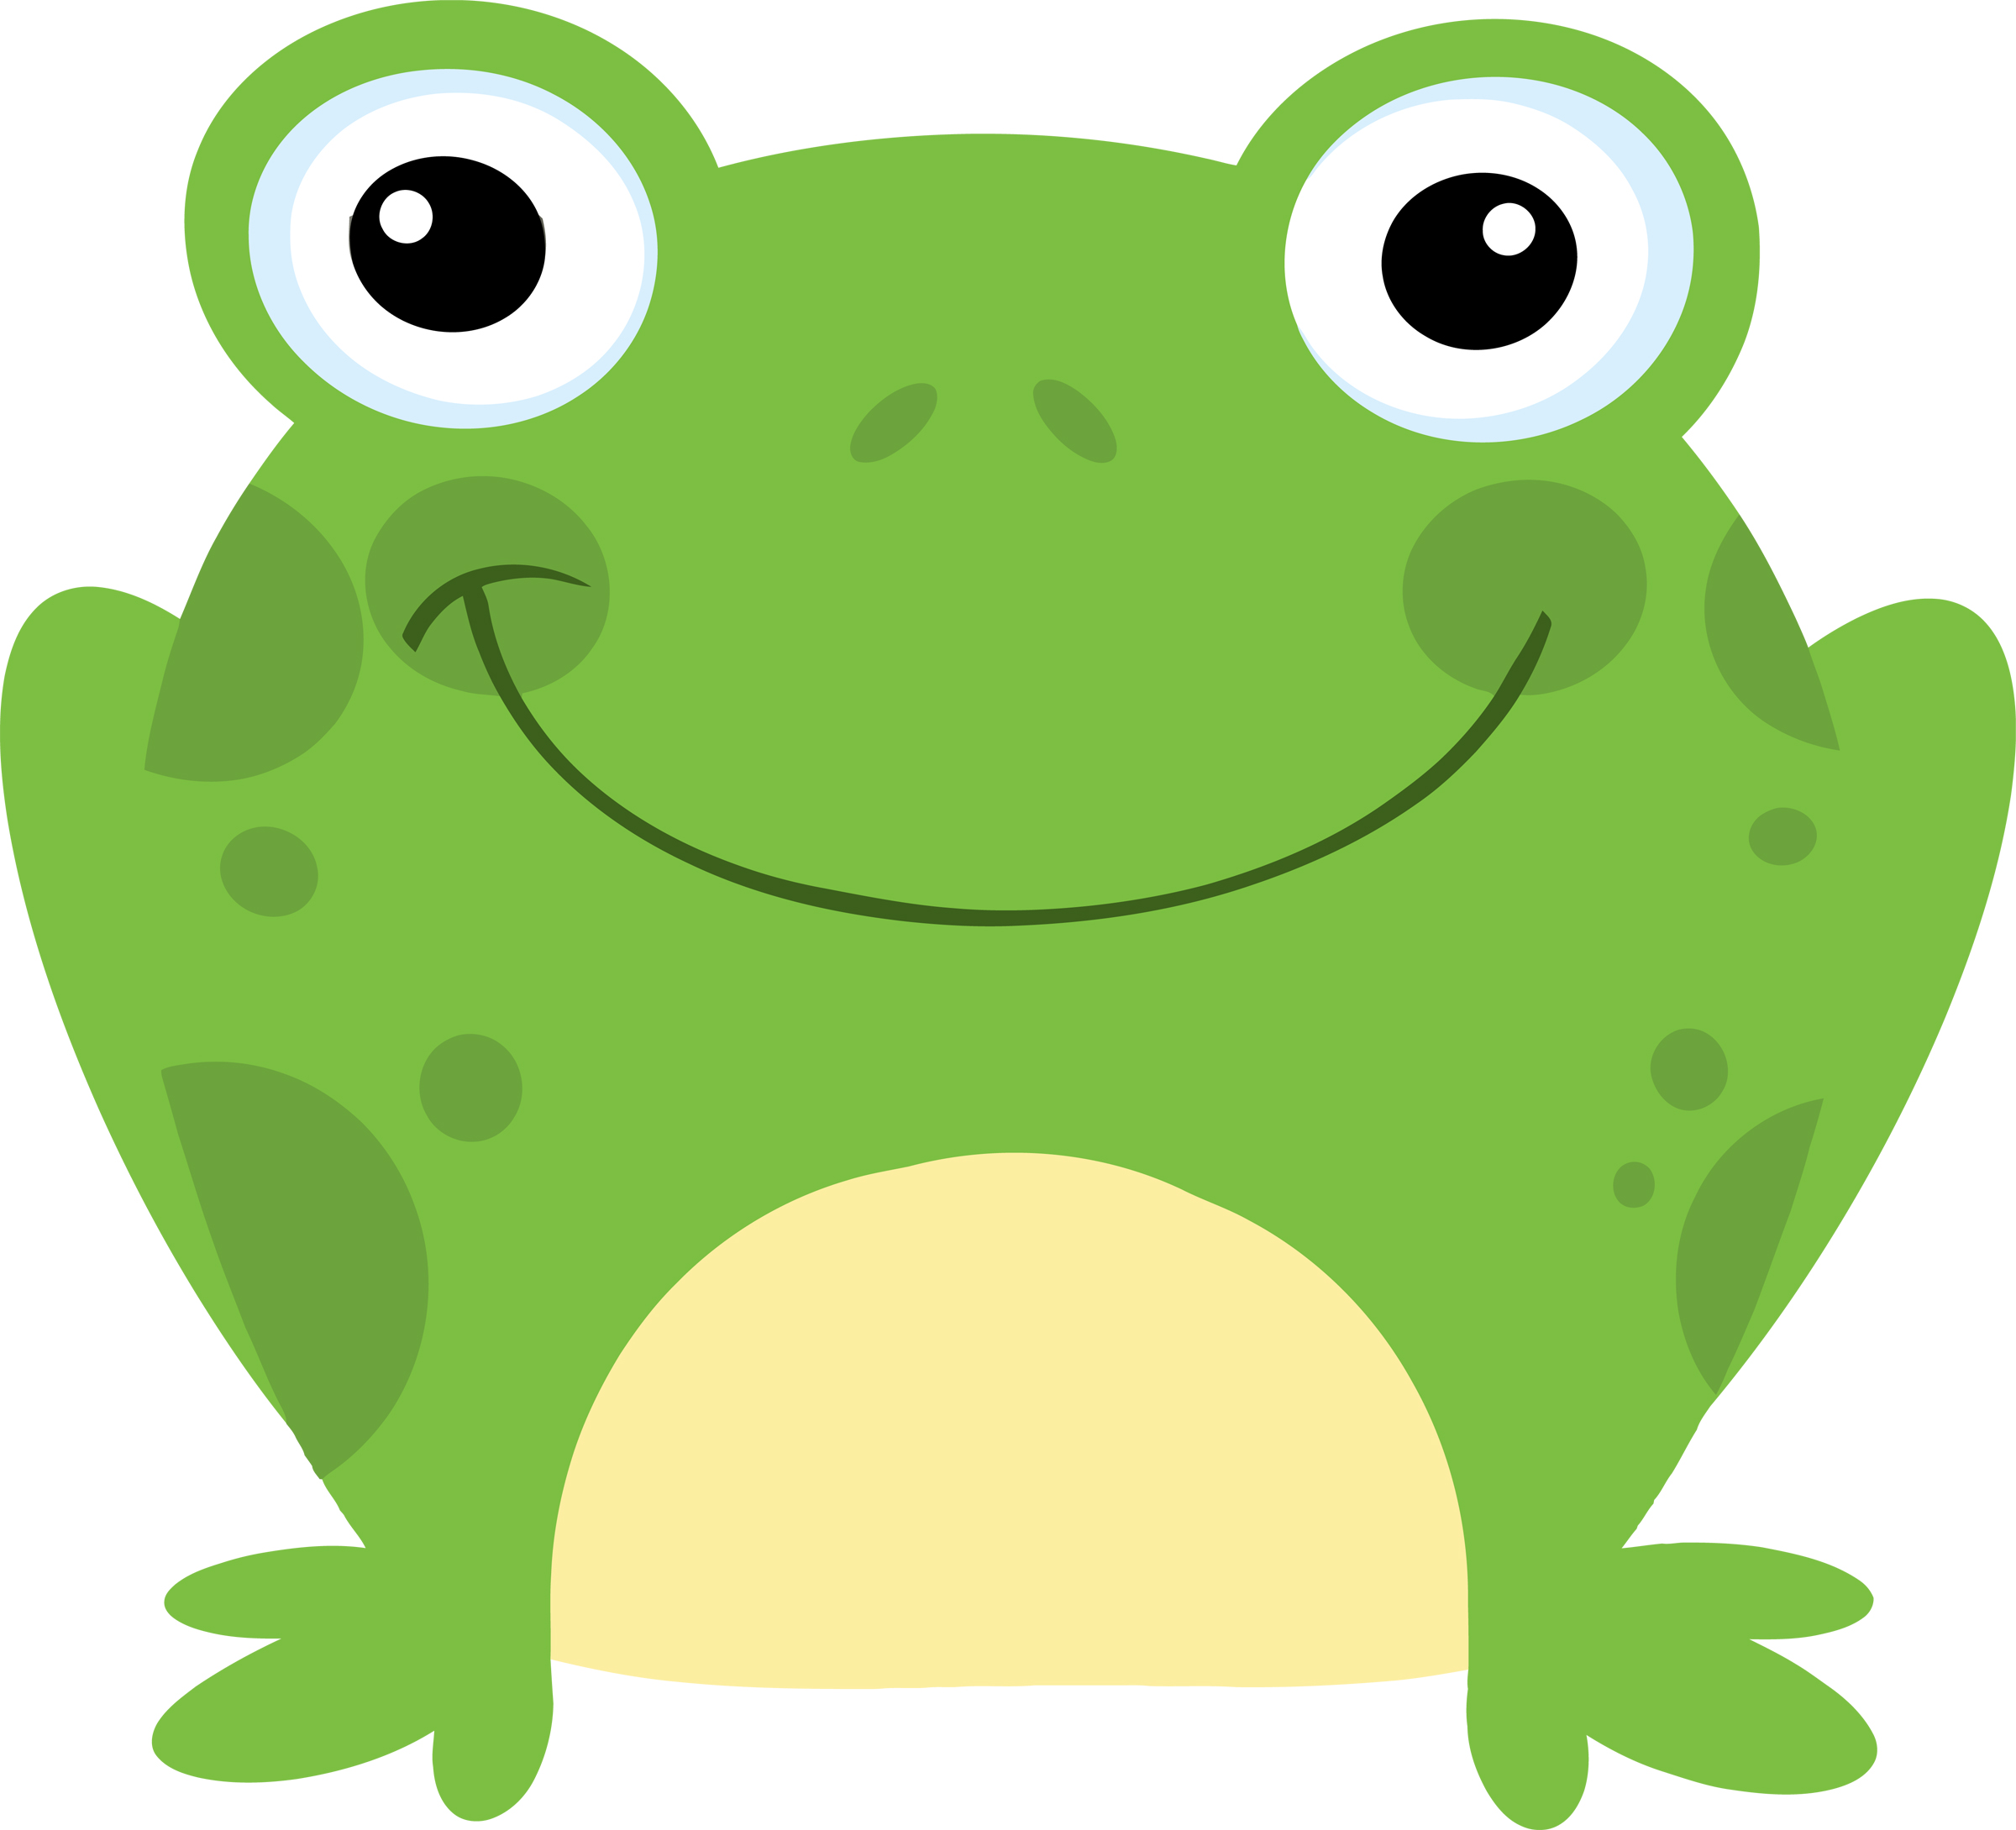 Frog Clipart - 68 cliparts